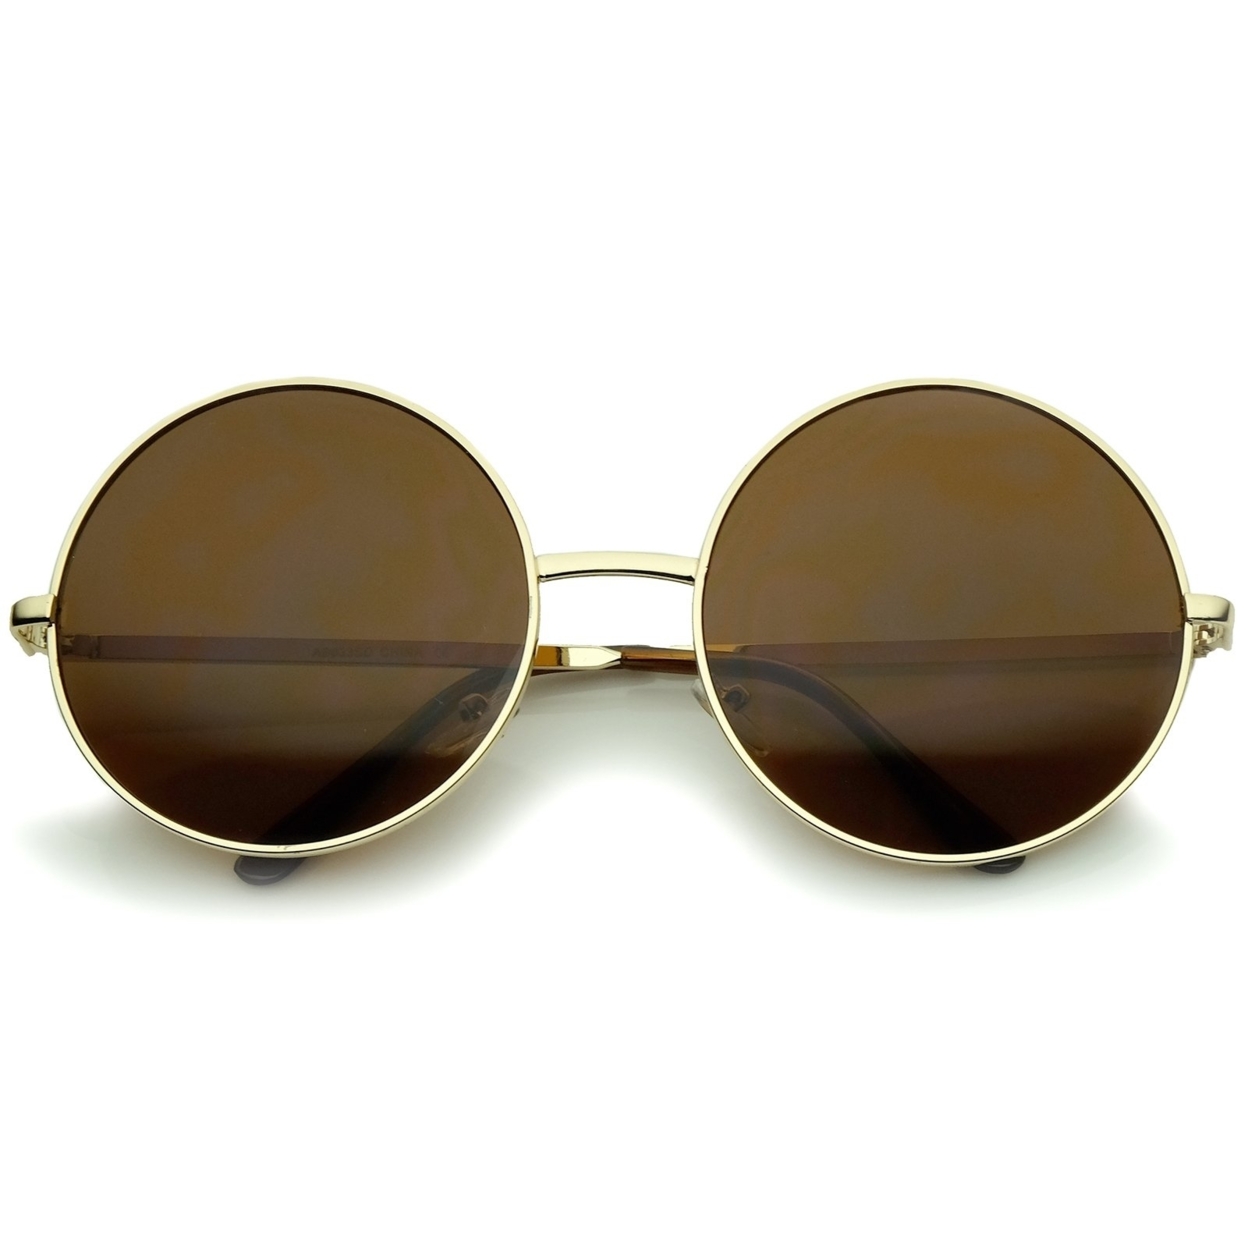 Super Large Oversize Slim Temple Round Sunglasses 61mm - Gold / Brown